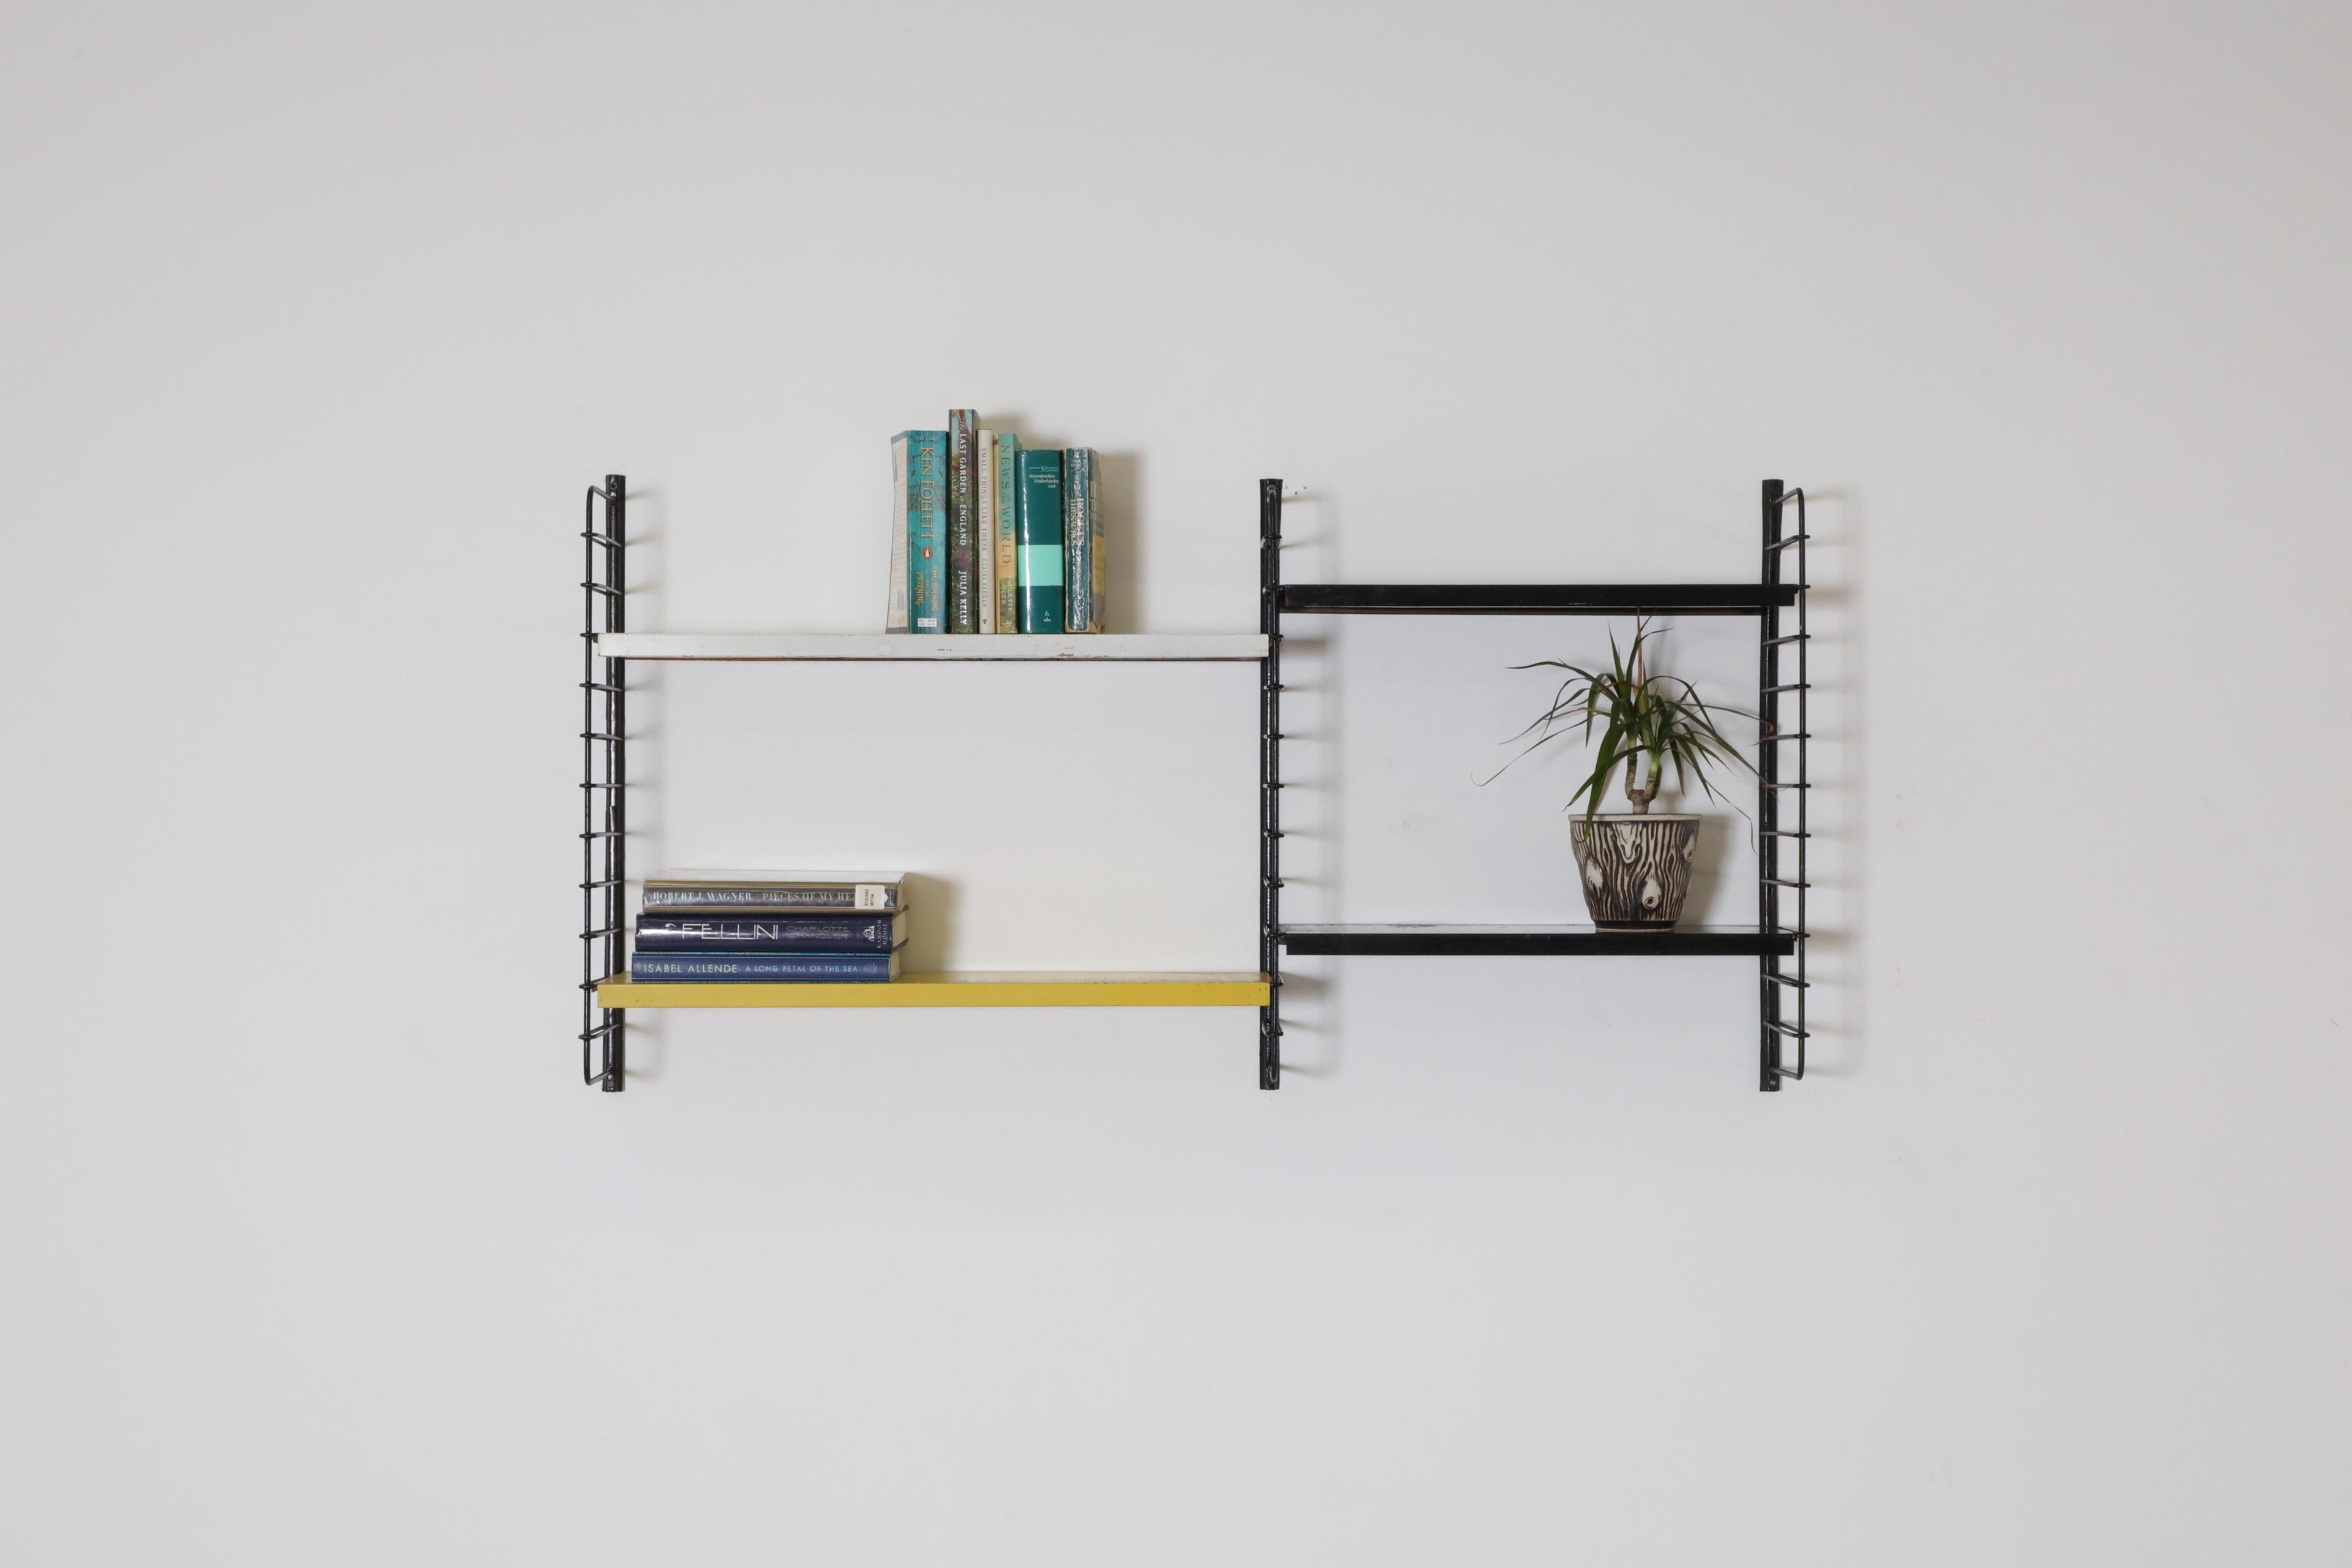 Dutch Mid-Century double section industrial wall mount shelving unit with one wider section, which has a yellow  white shelf and a narrower section with two black shelves. The shelves rest on black enameled metal risers, and all are in very used